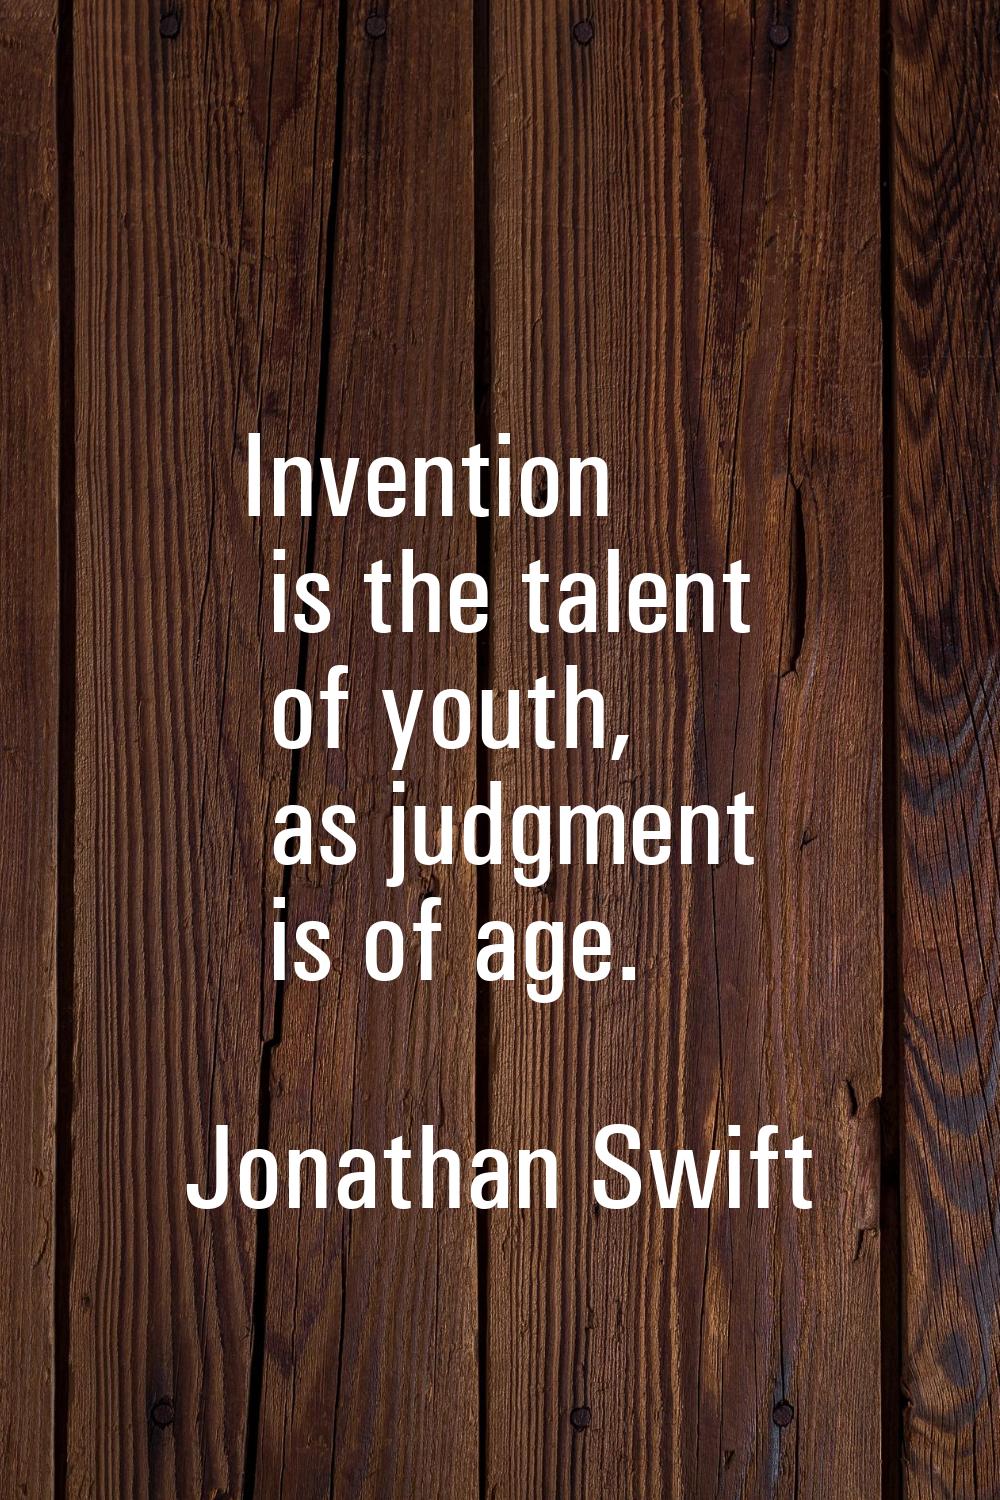 Invention is the talent of youth, as judgment is of age.